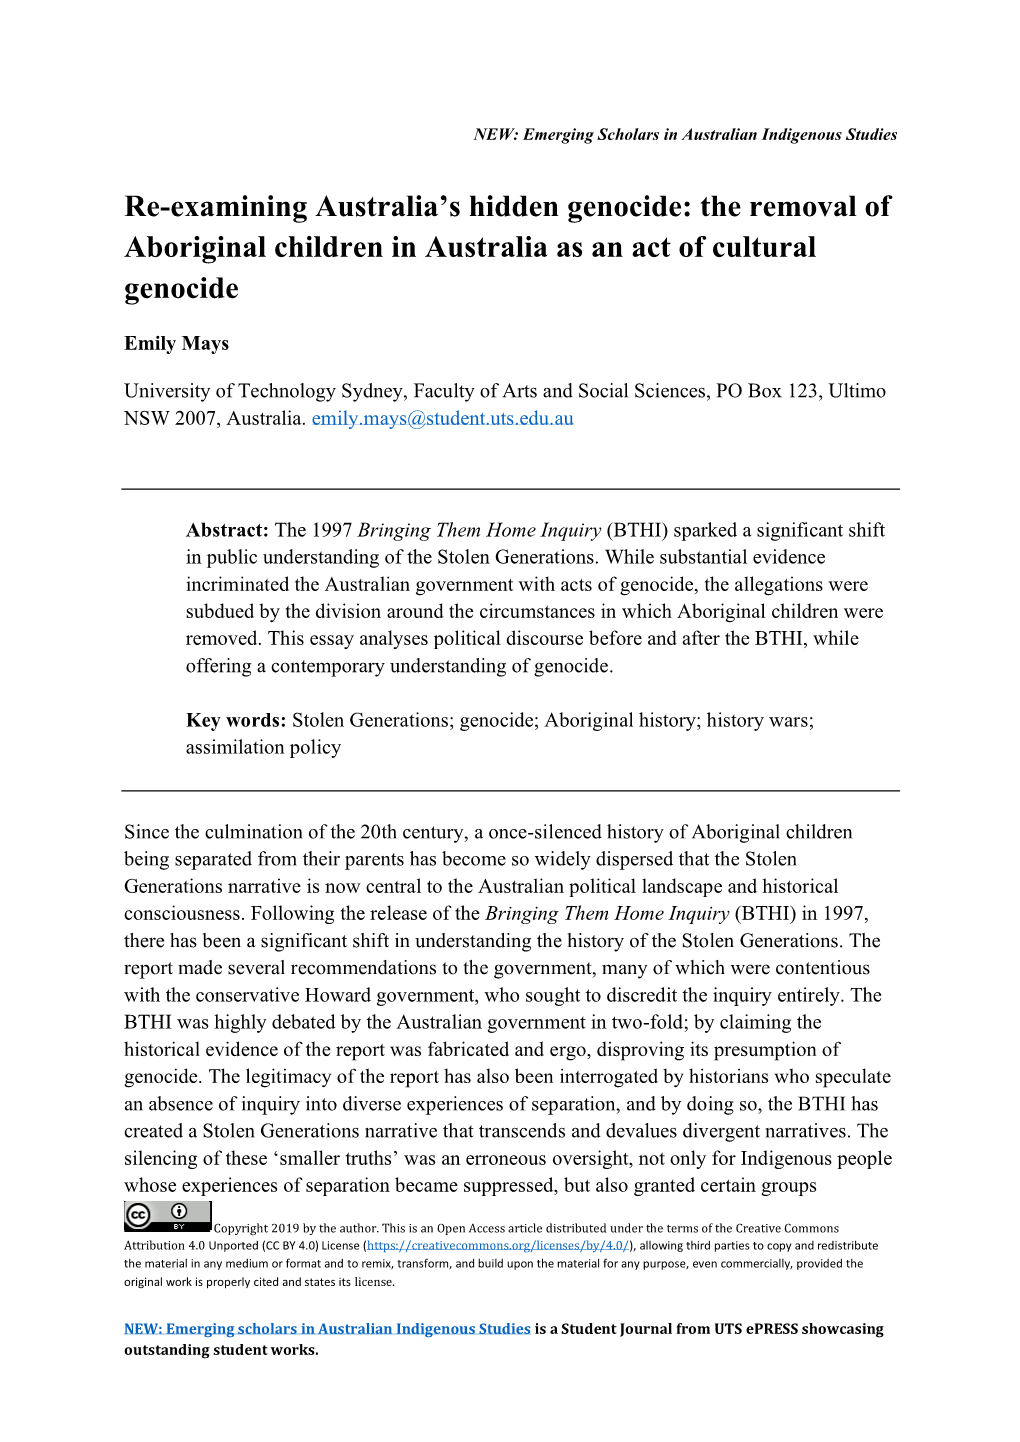 The Removal of Aboriginal Children in Australia As an Act of Cultural Genocide